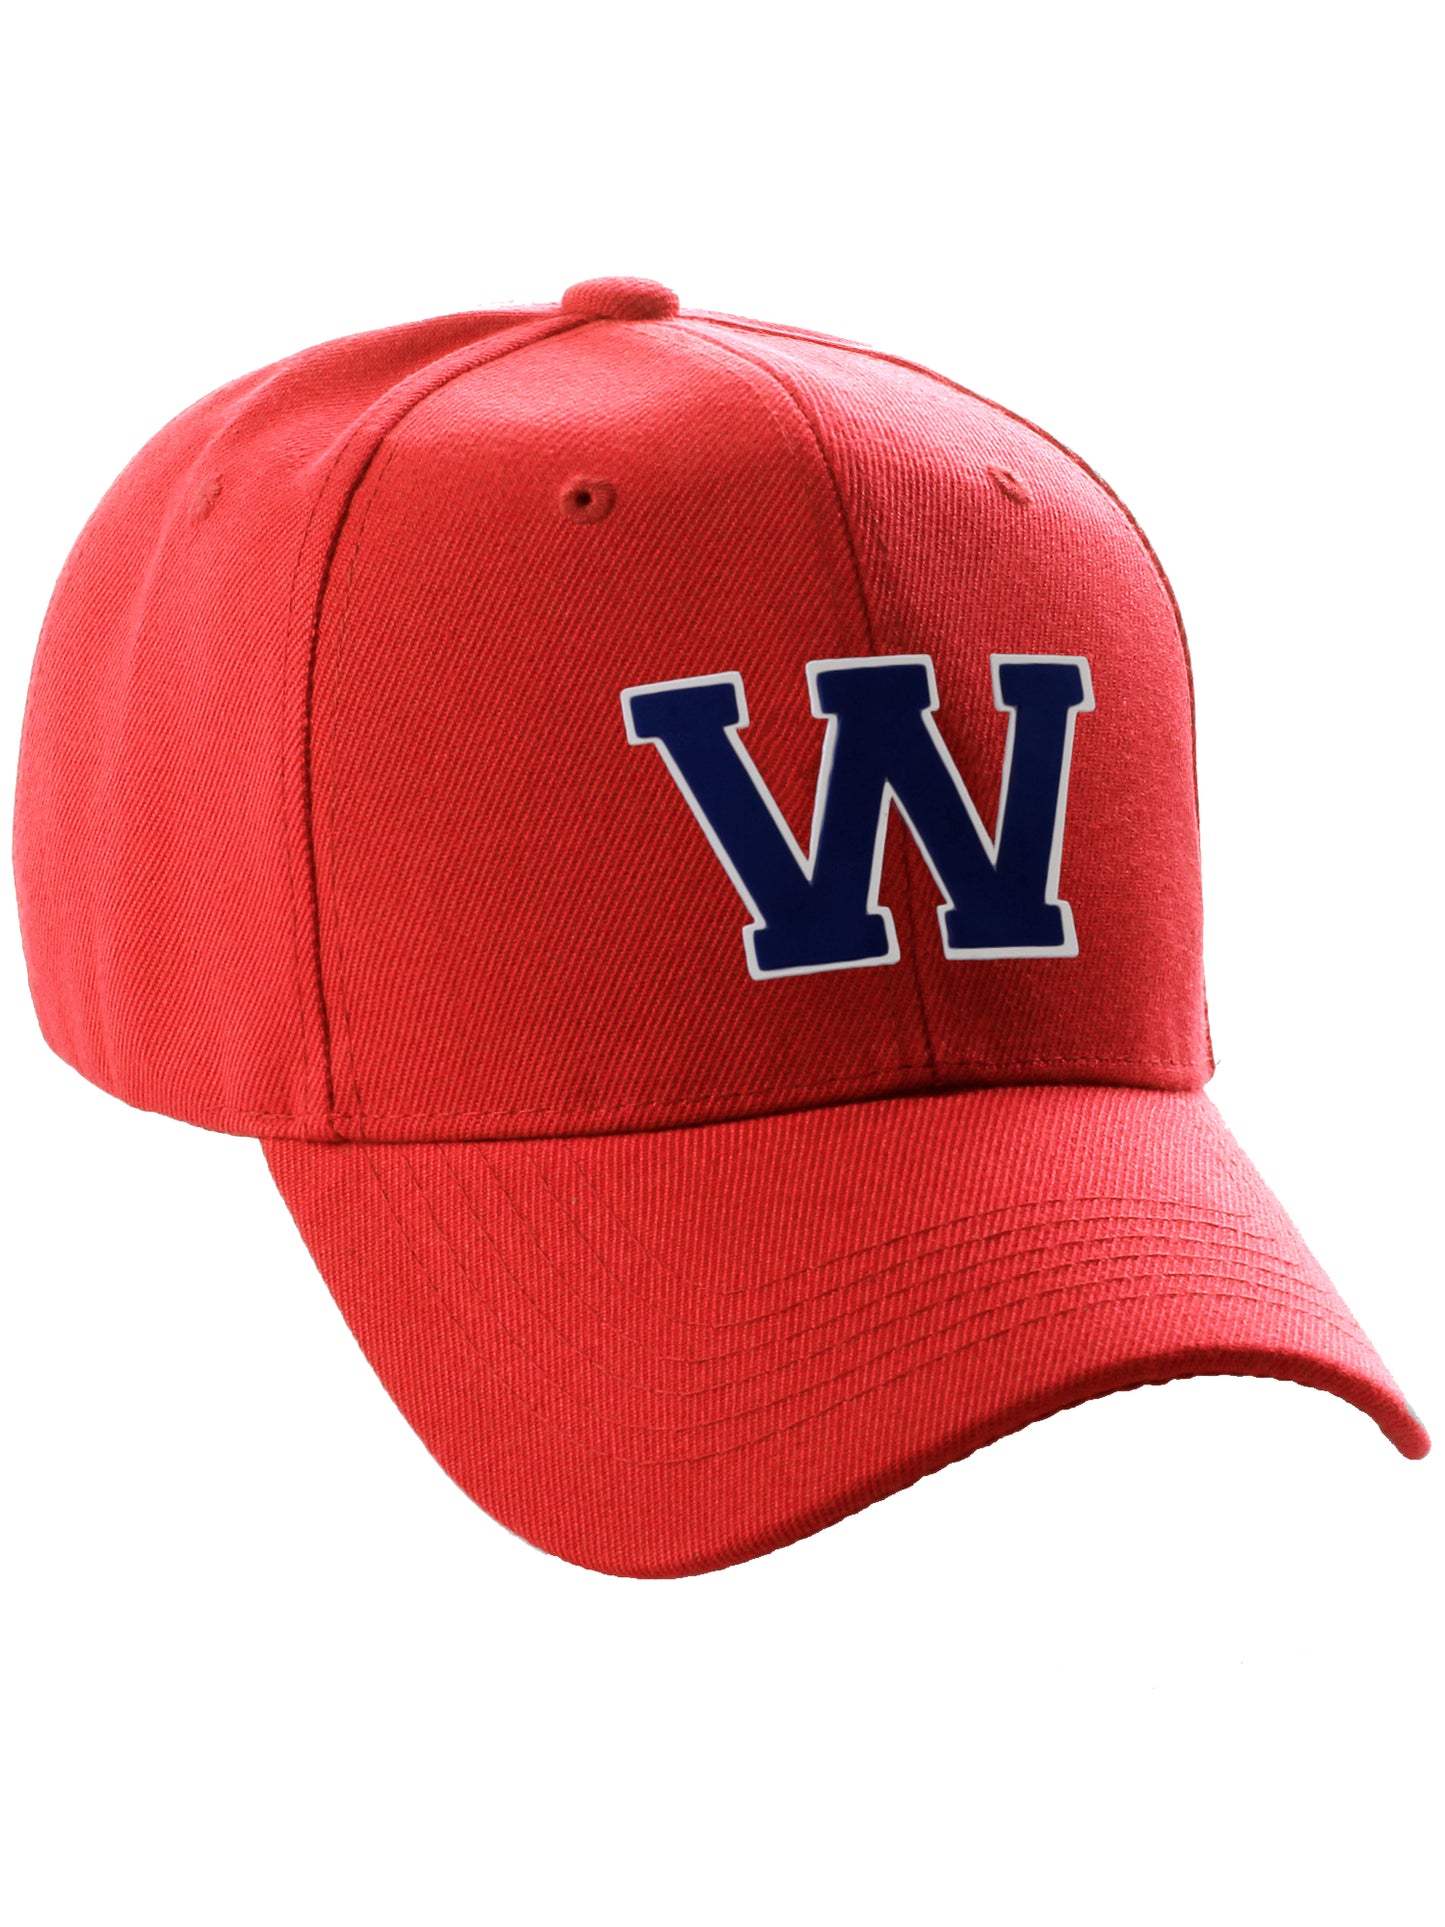 Classic Baseball Hat Custom A to Z Initial Team Letter, Red Cap White Navy